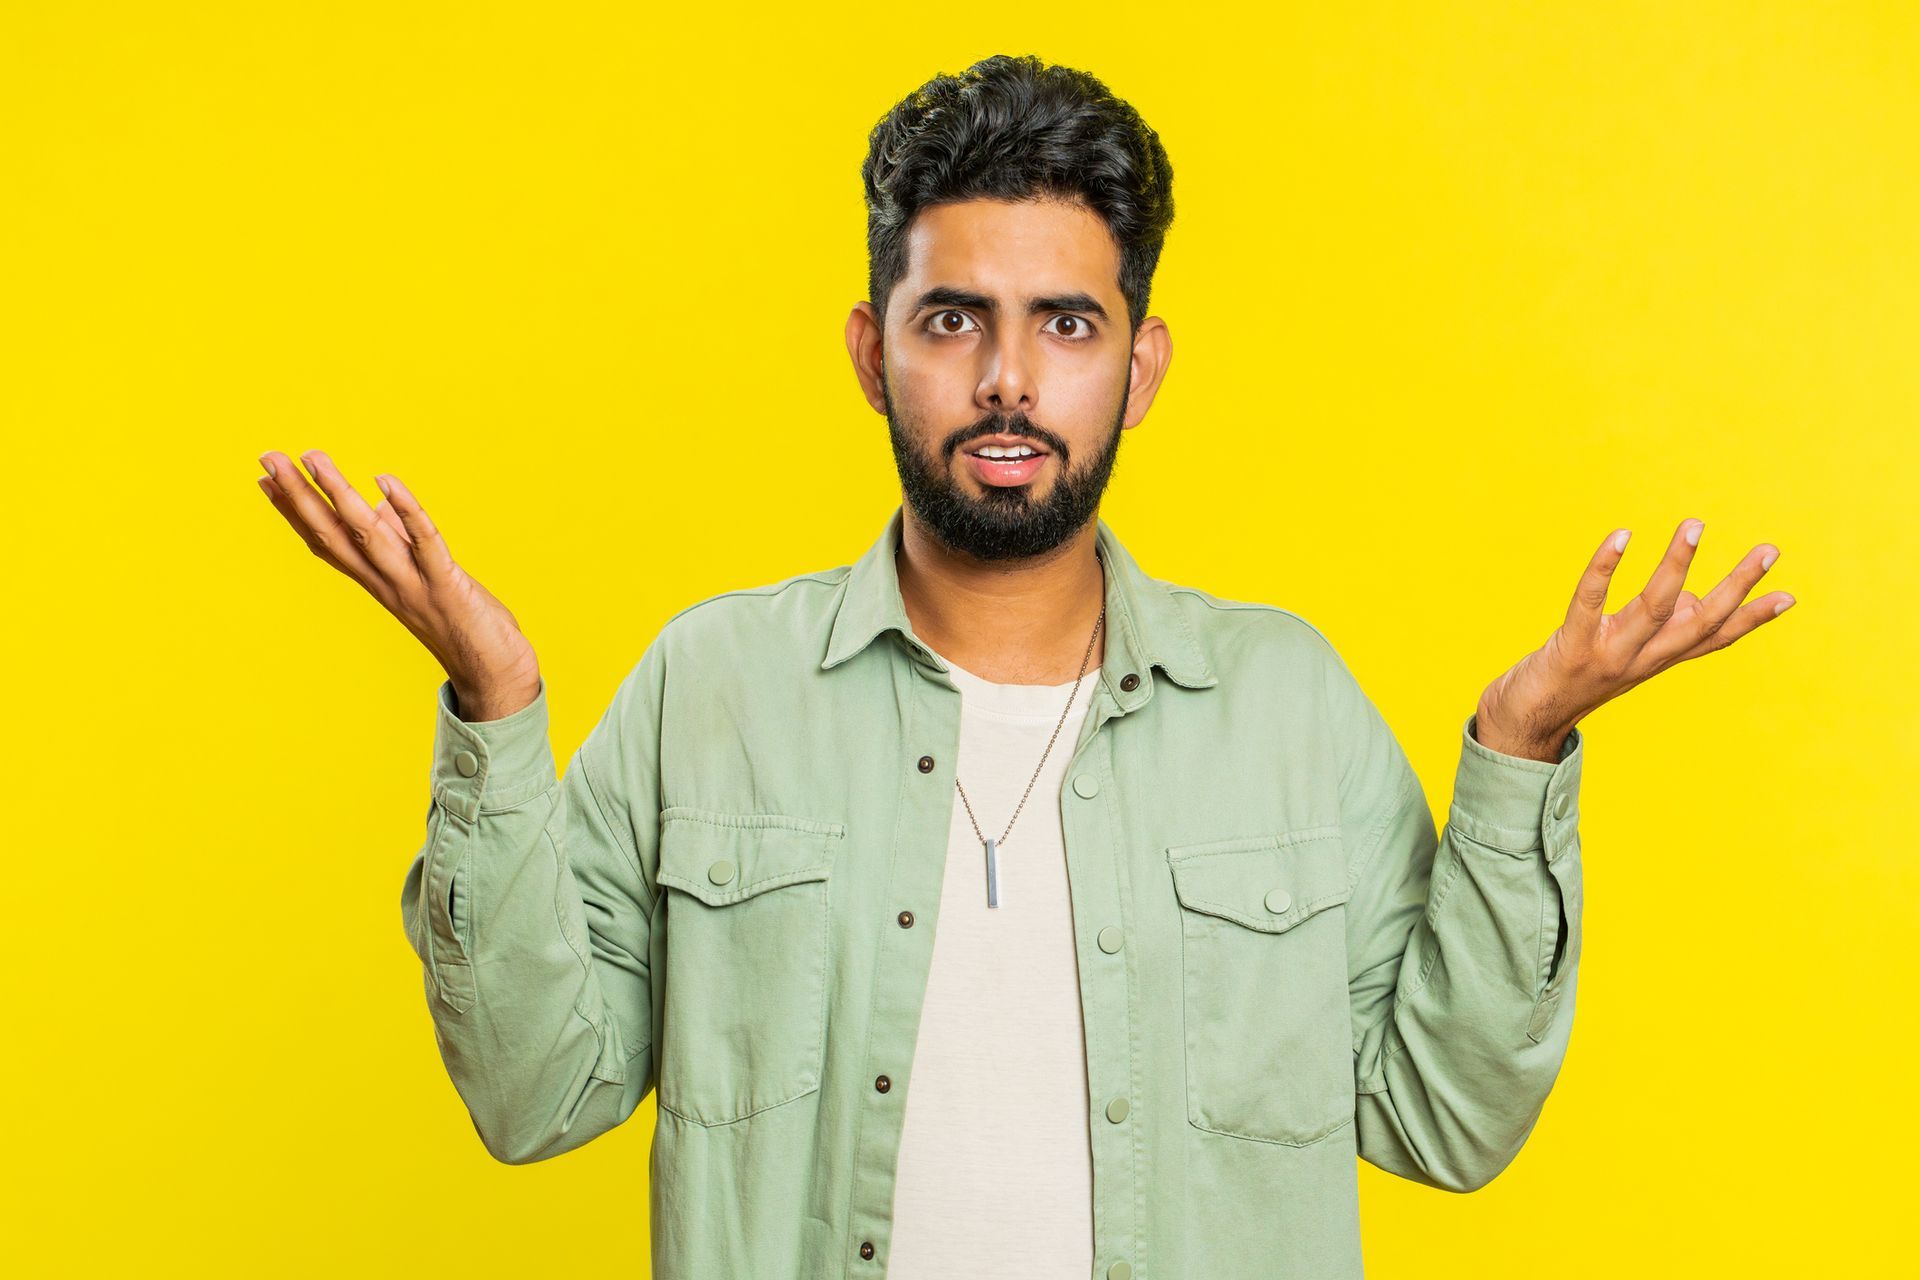 A young man with a beard is shrugging his shoulders on a yellow background.